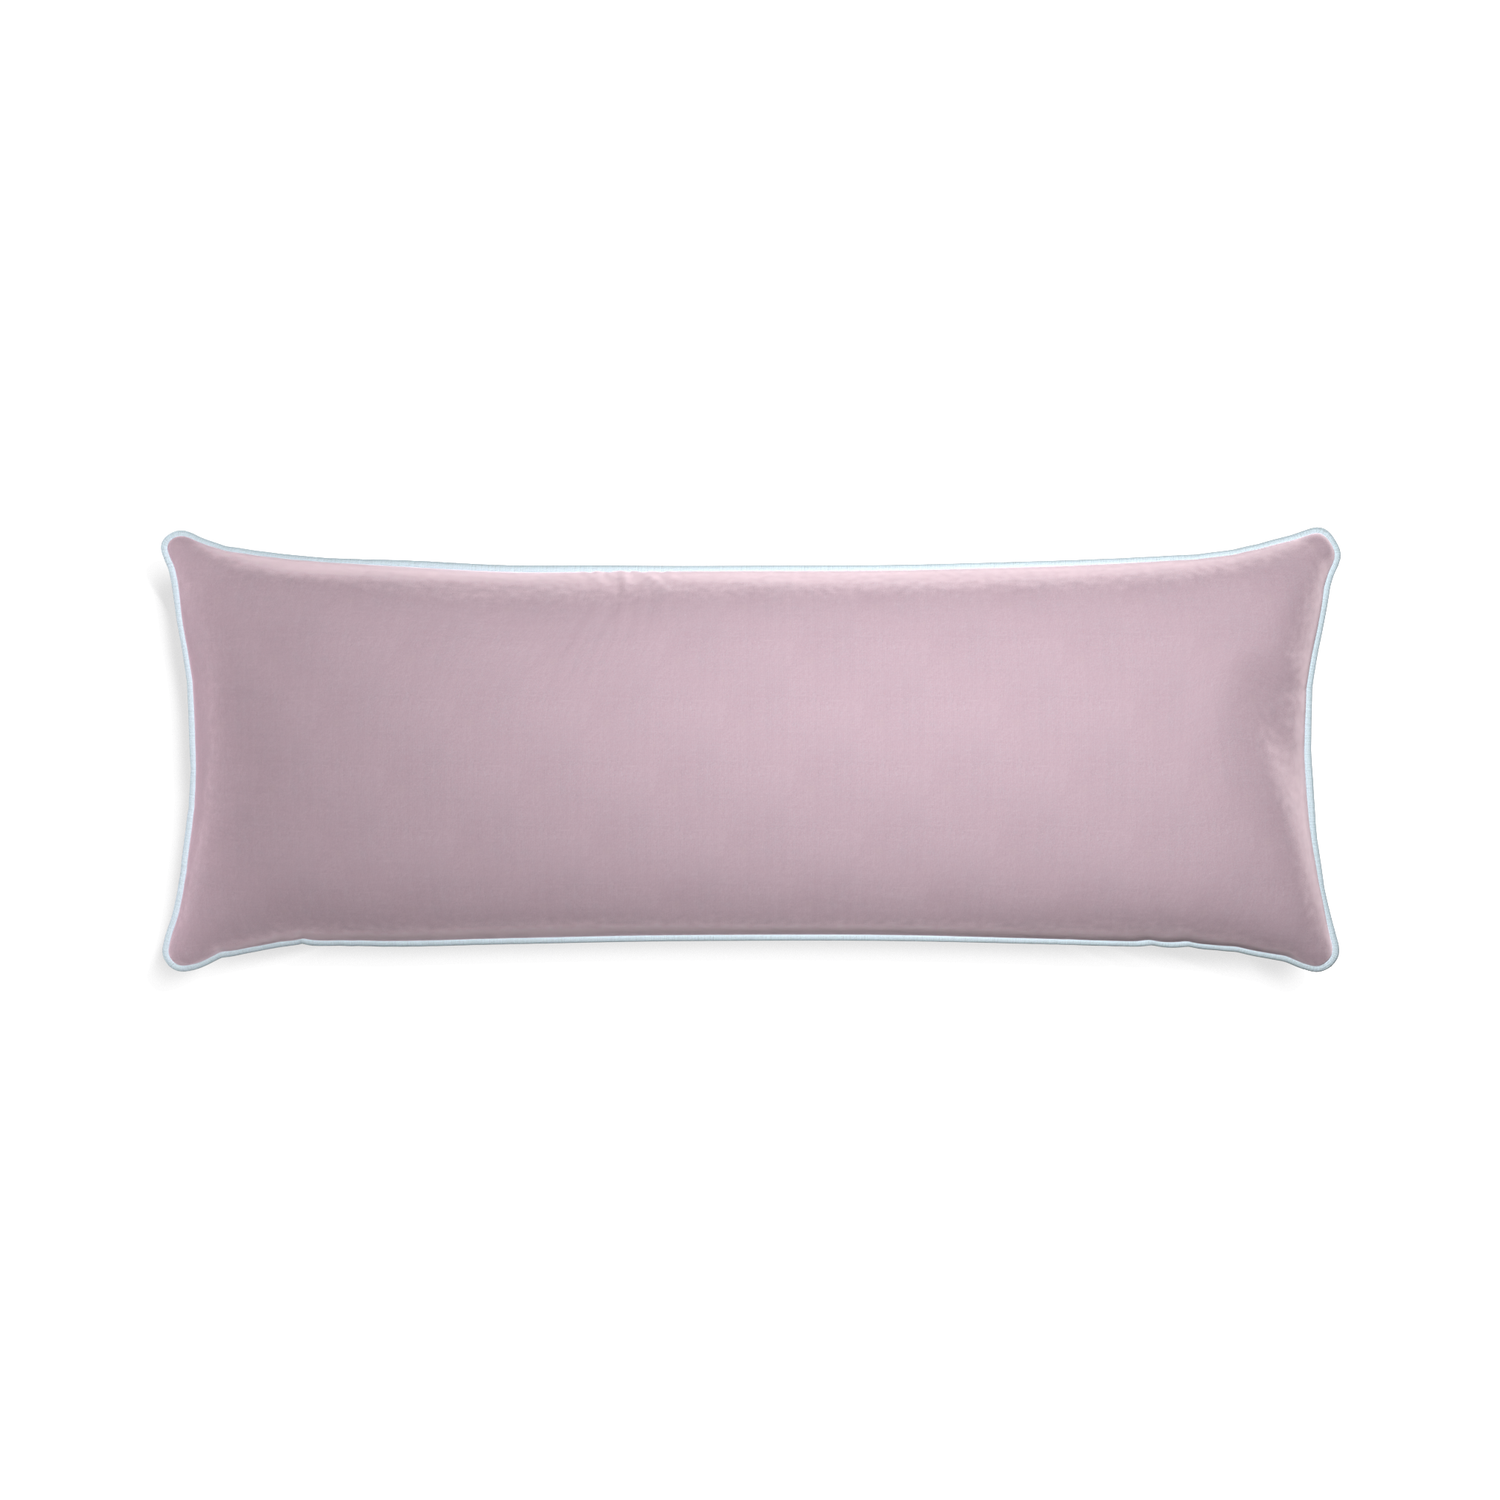 Xl-lumbar lilac velvet custom lilacpillow with powder piping on white background